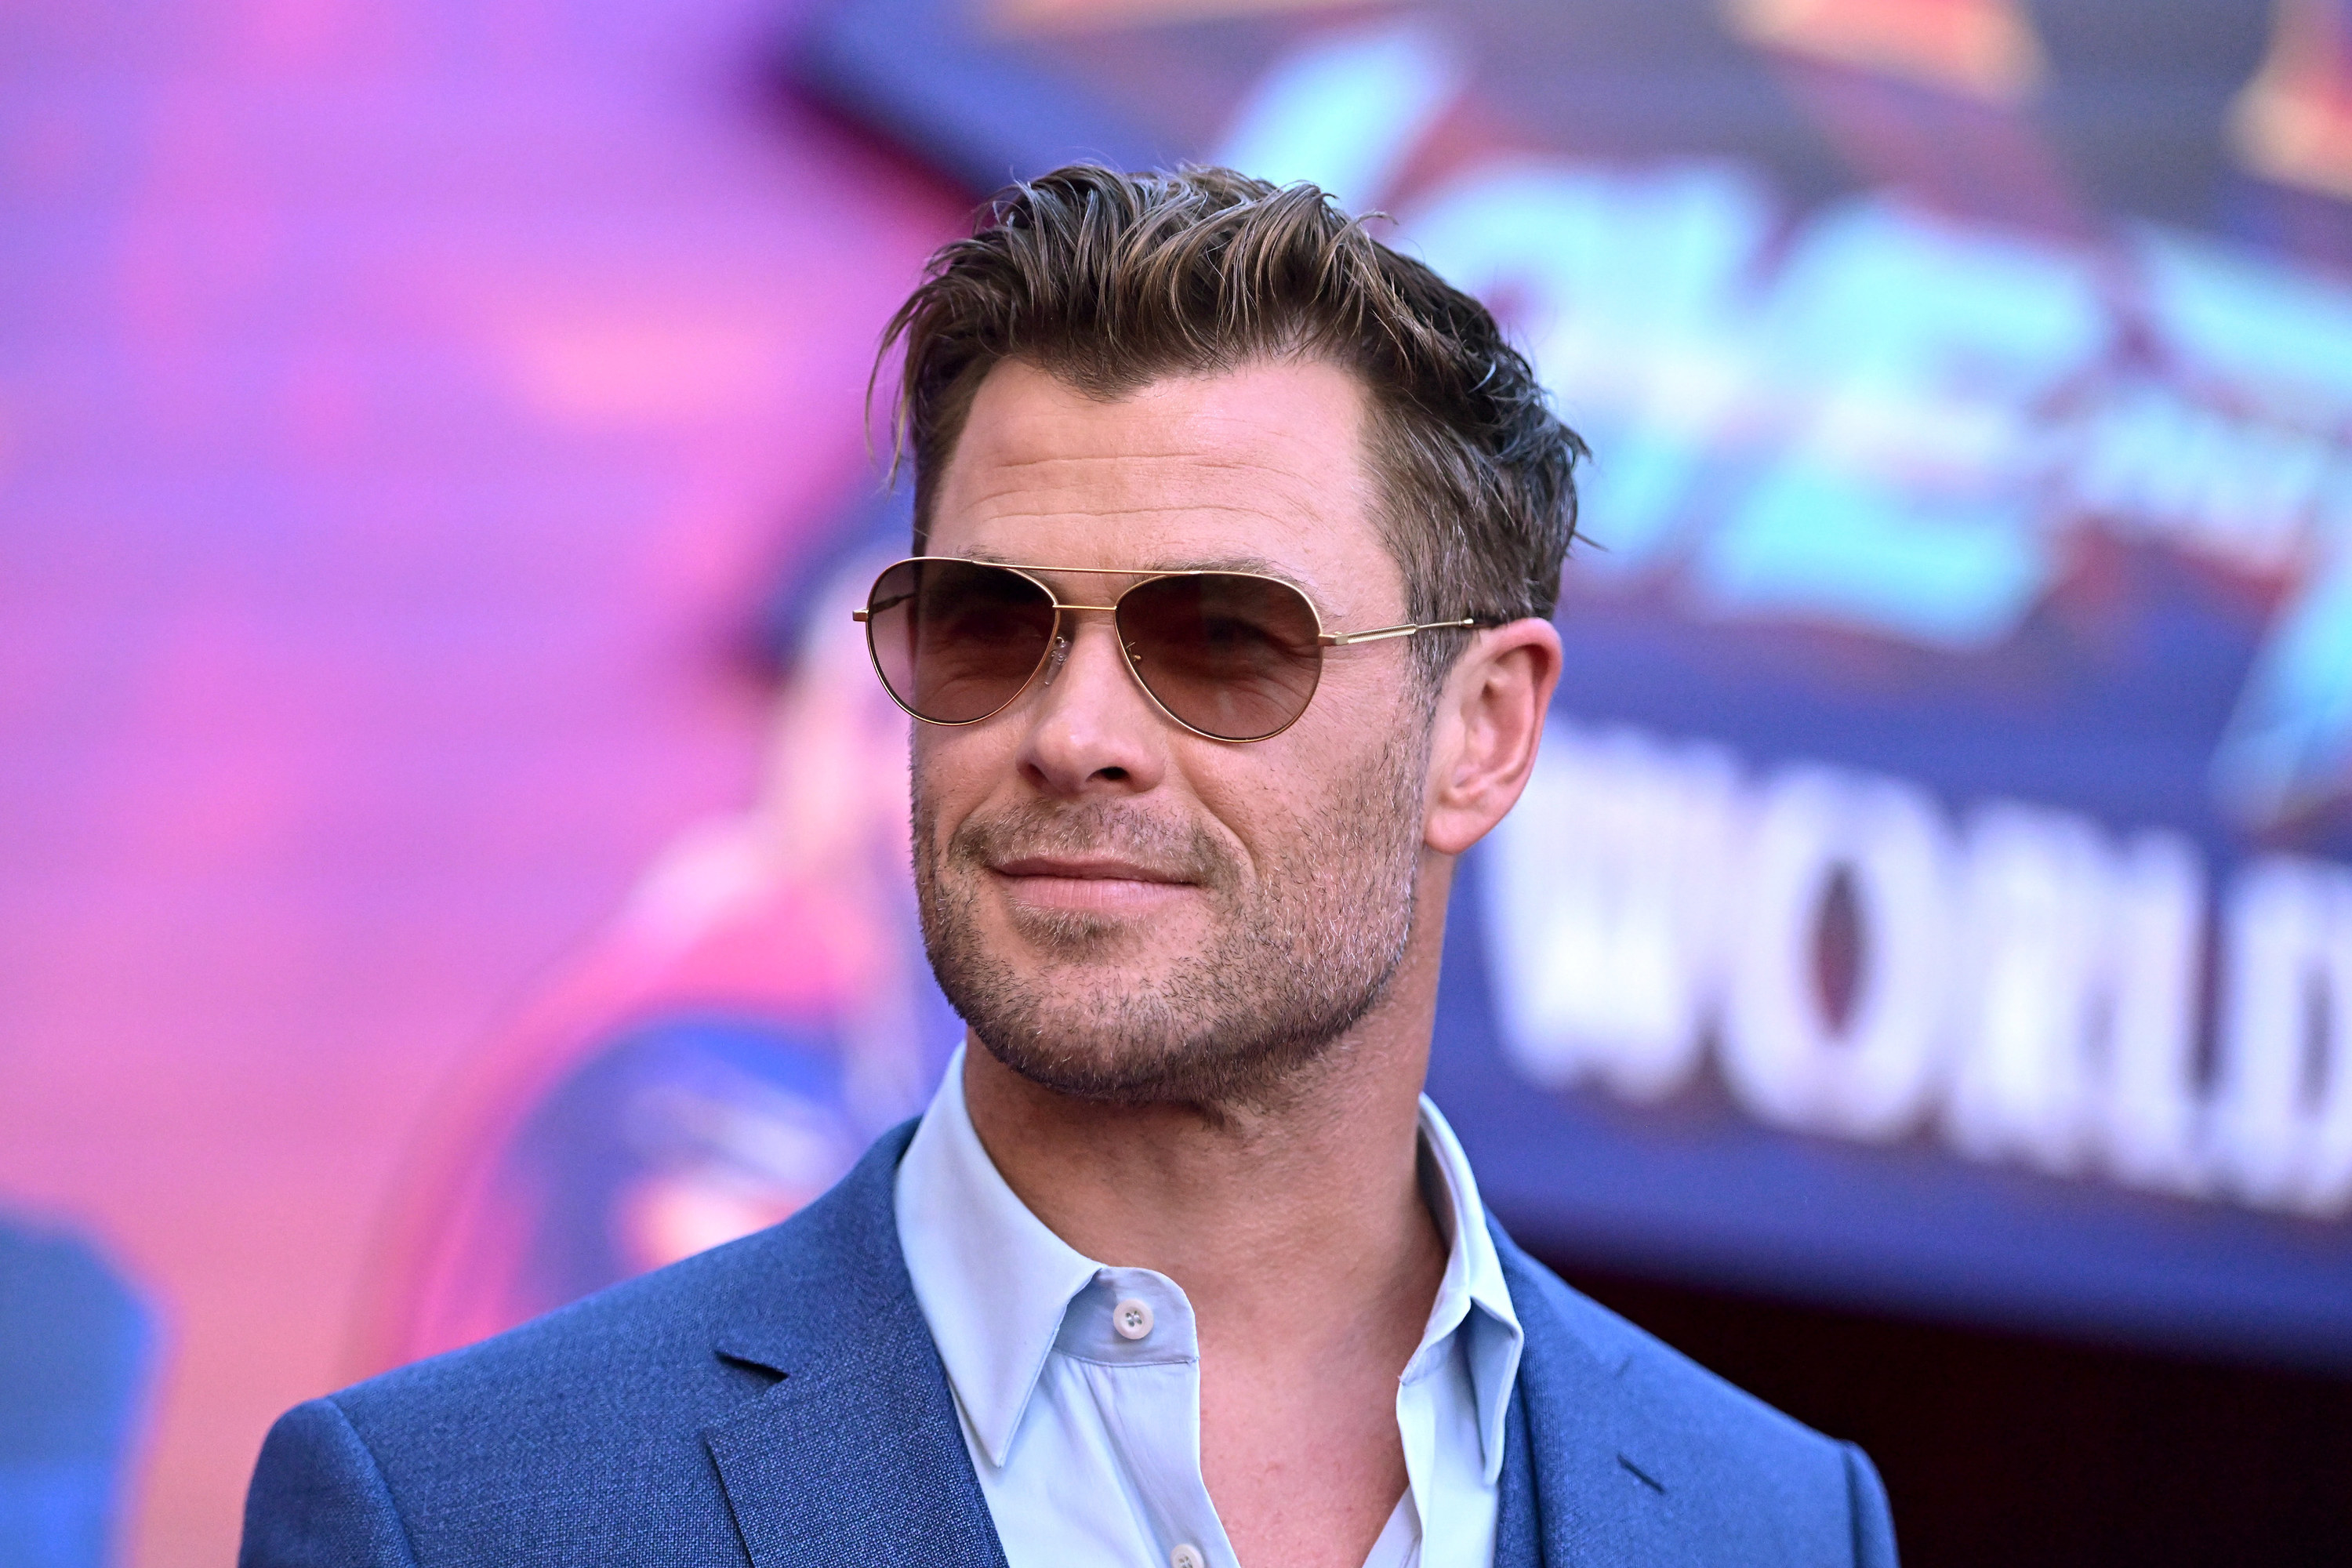 close up of chris wearing sunglasses and a suit